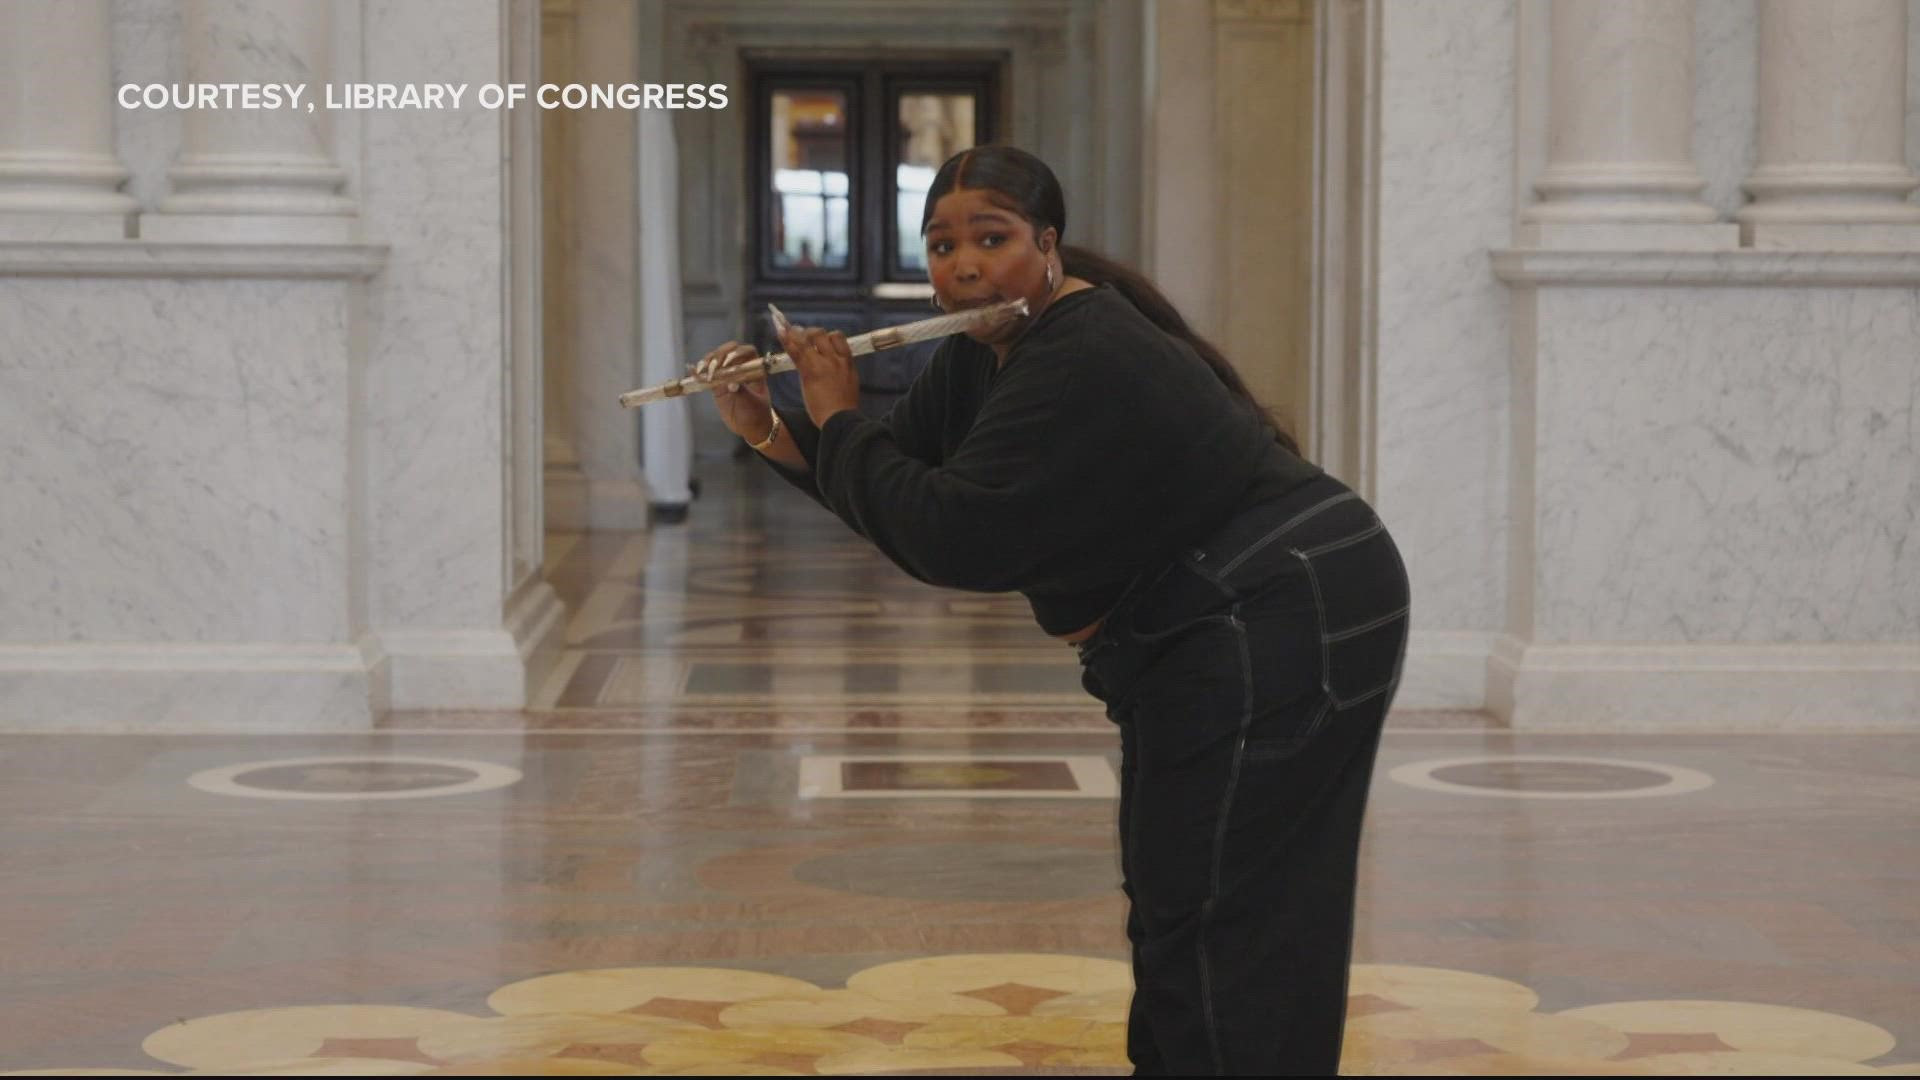 Lizzo played a crystal flute, once owned by President James Madison. Let's look inside the Library of Congress to see how it made this historic performance happen